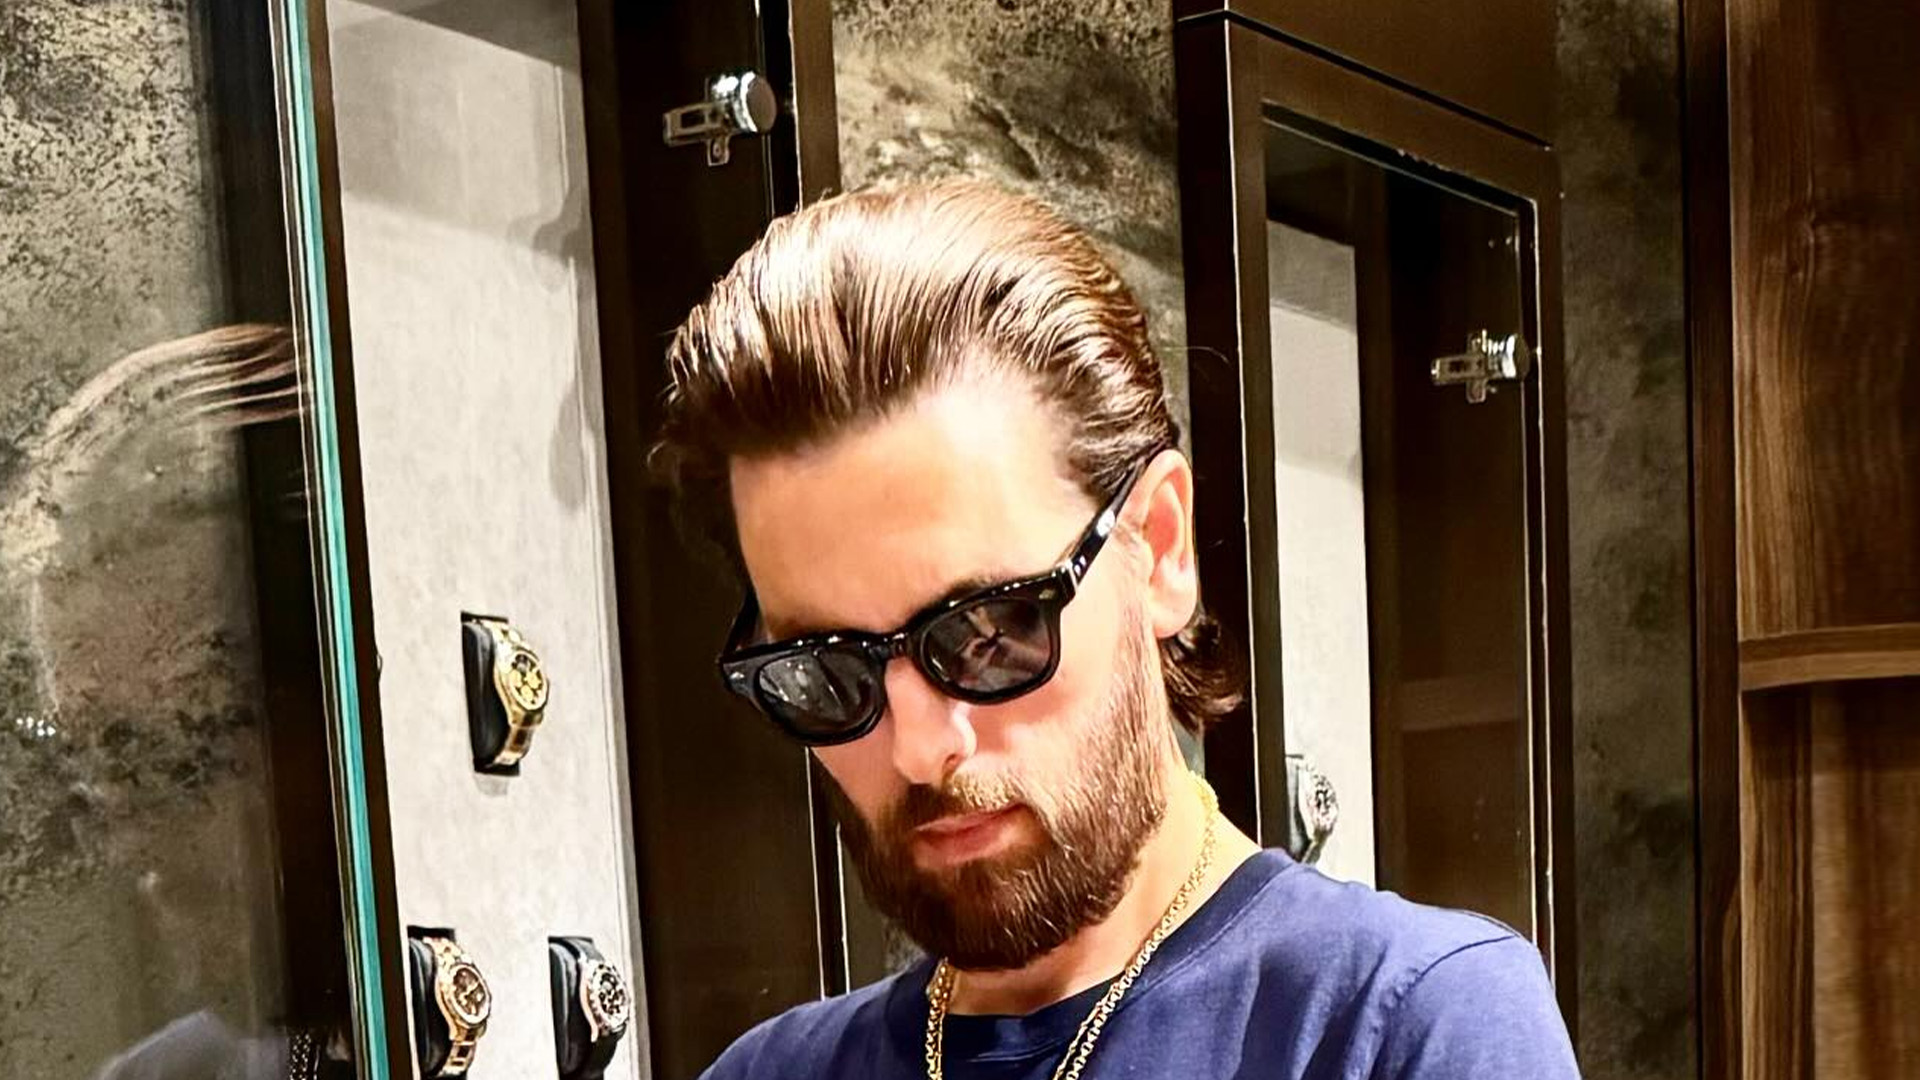 Scott Disick sparks concern as his pin-thin figure drowns in baggy pants during backyard ride with son Reign, 9